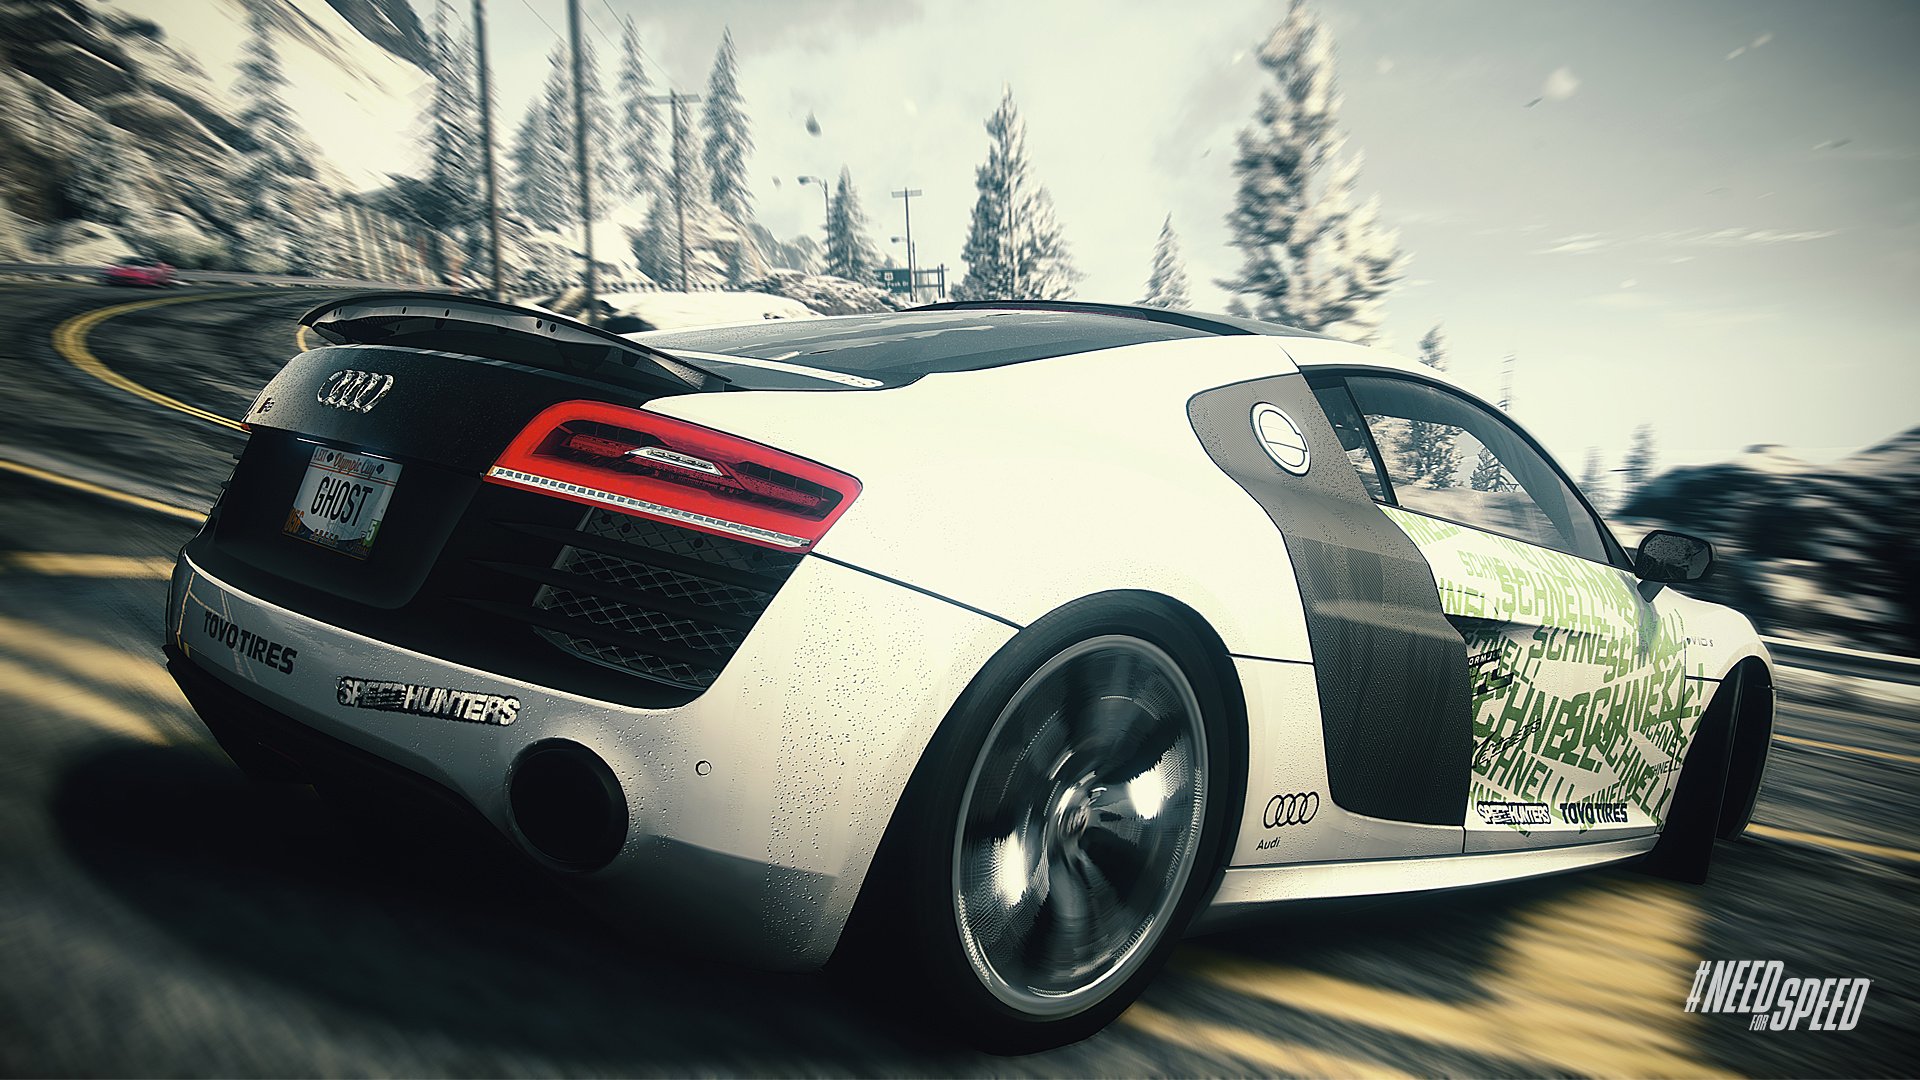 Need for Speed Rivals PS4 Review - Impulse Gamer